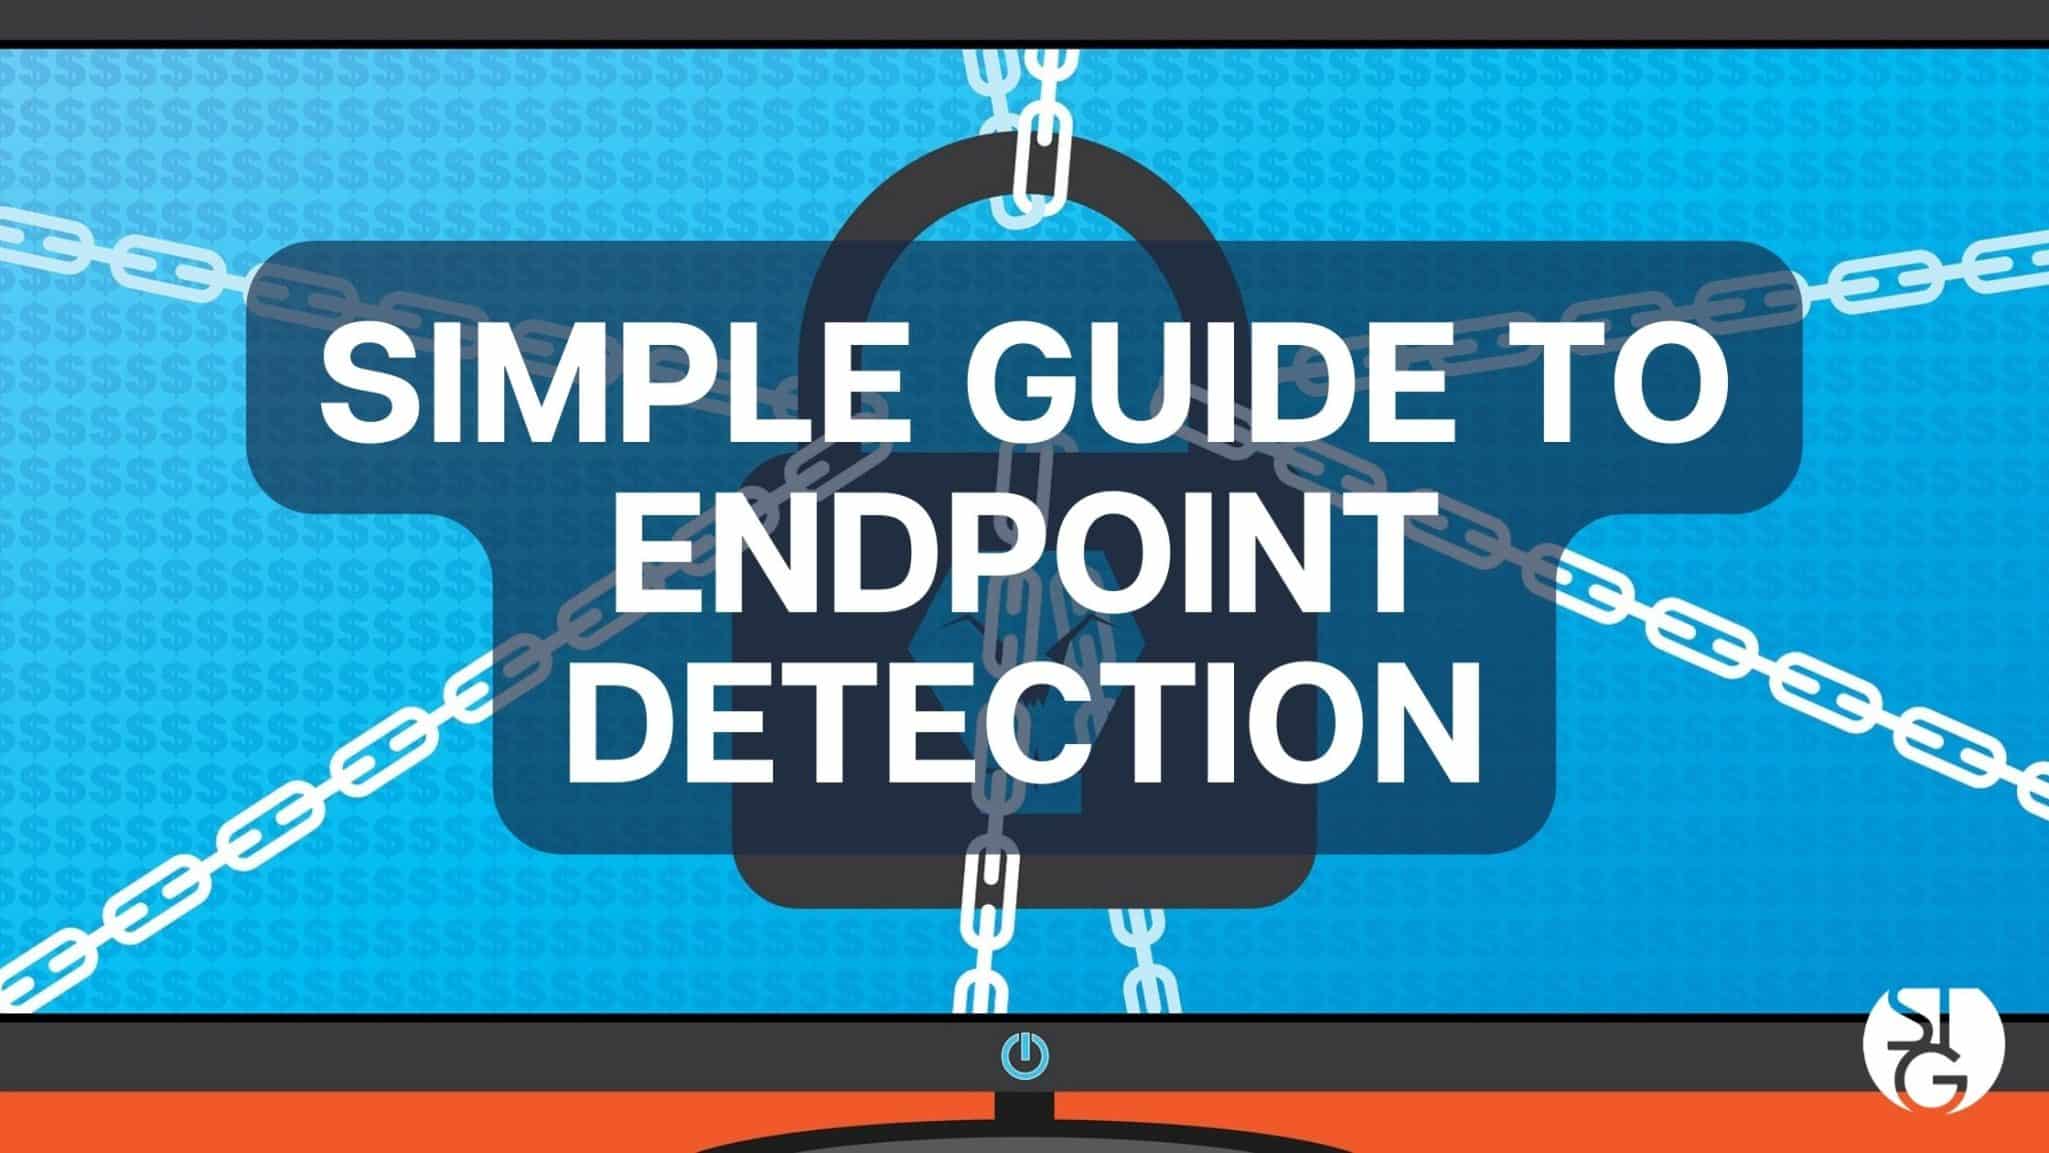 Follow This Simple Guide for Better Endpoint Detection